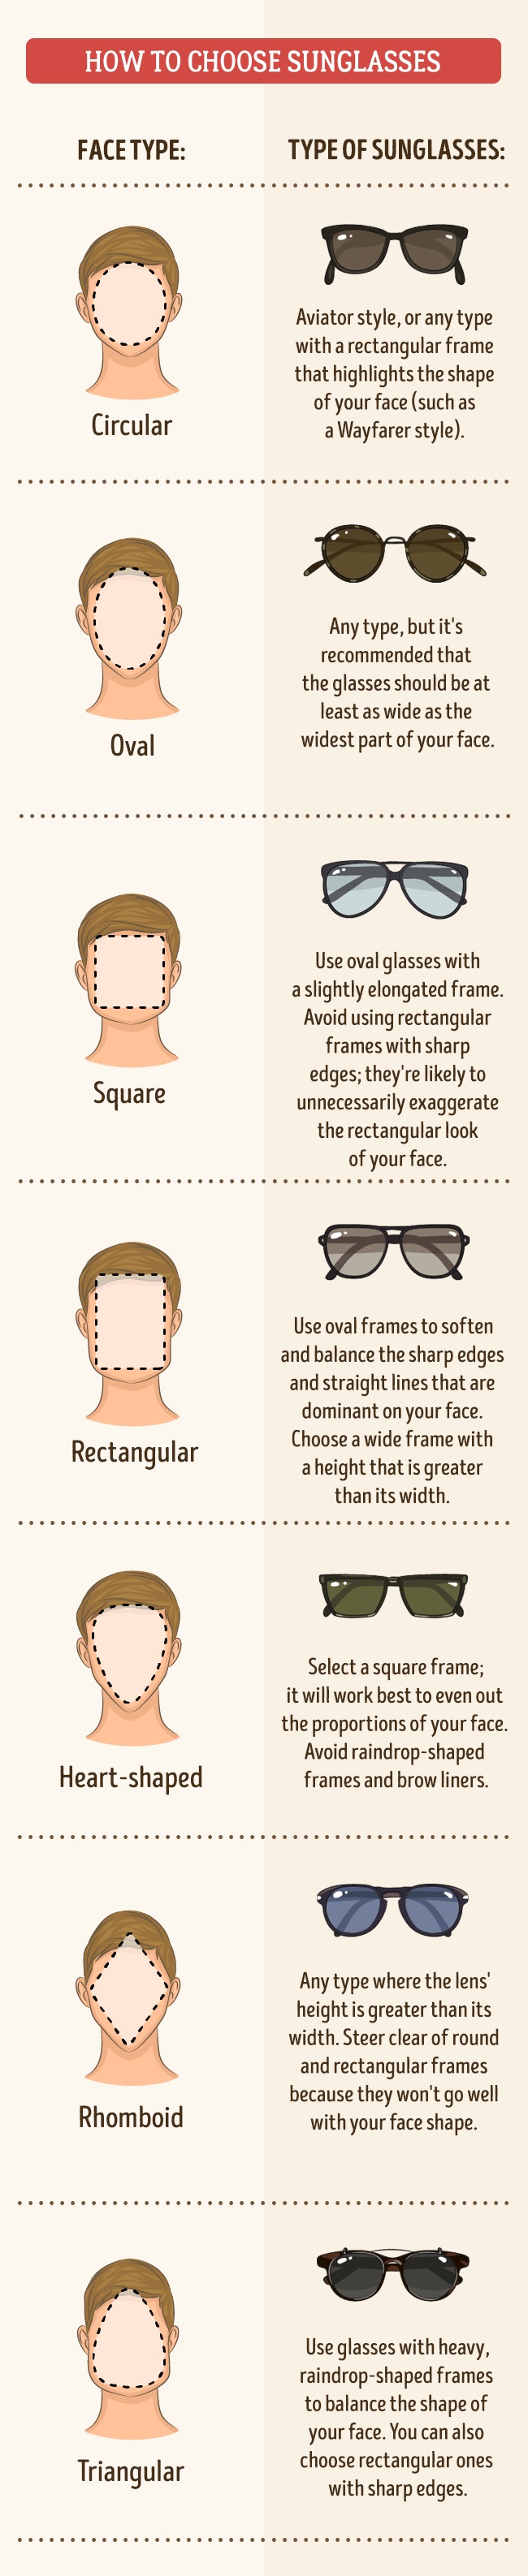 Sunglasses for faces